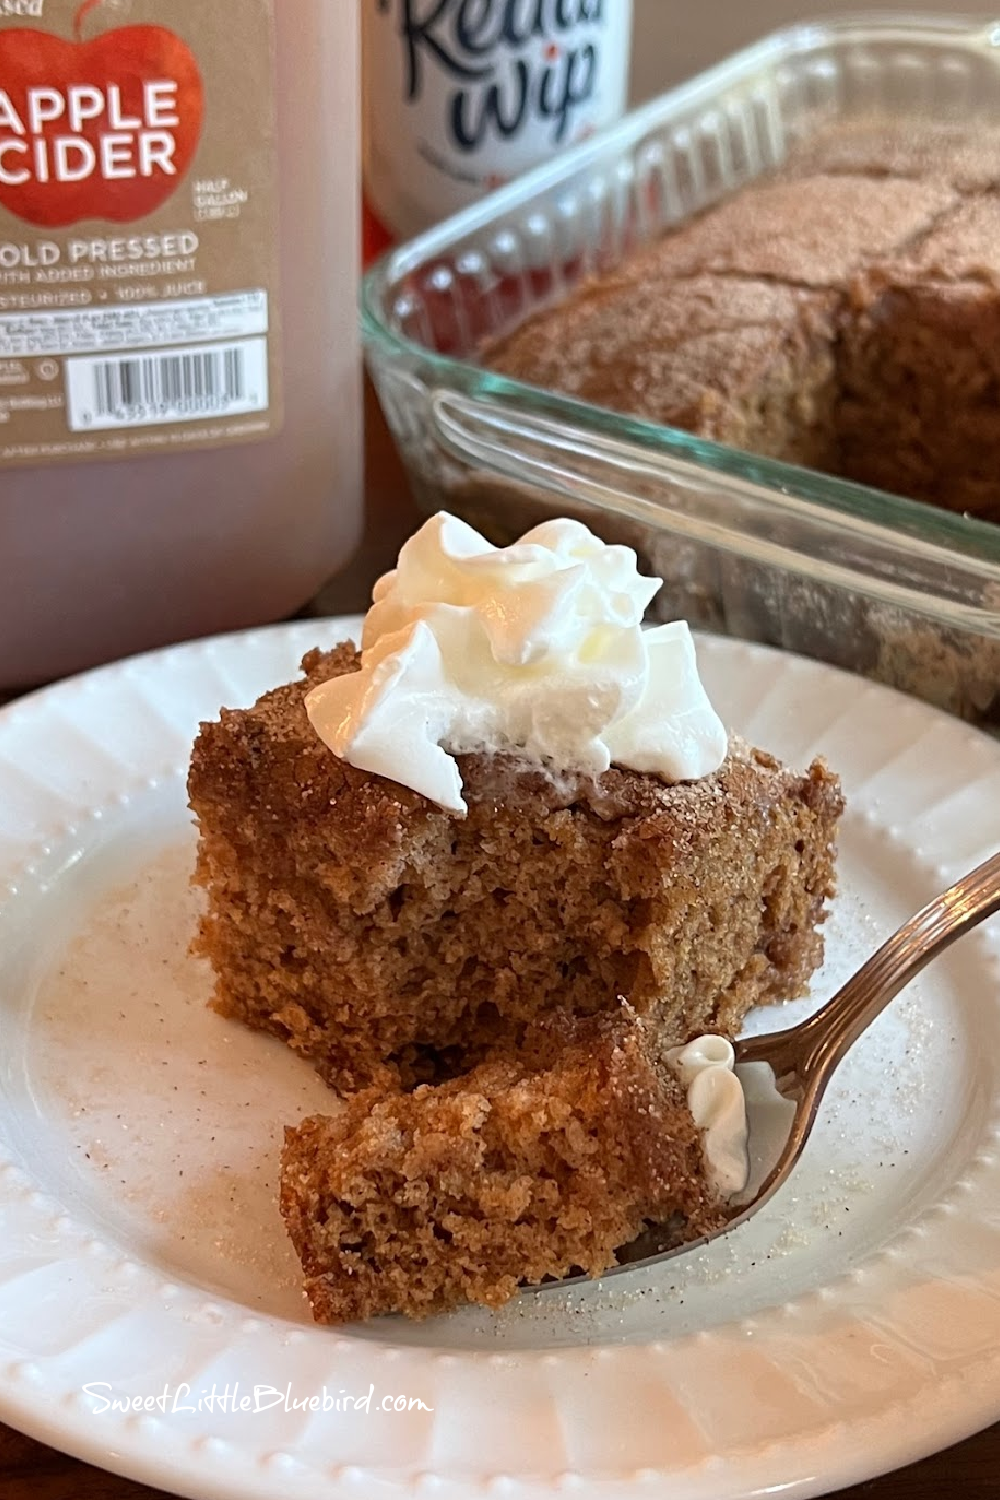 This photo shows a piece of Apple Cider Crazy Cake on a plate with a dollop of whipped cream on top, with a spoonful of cake on a fork.